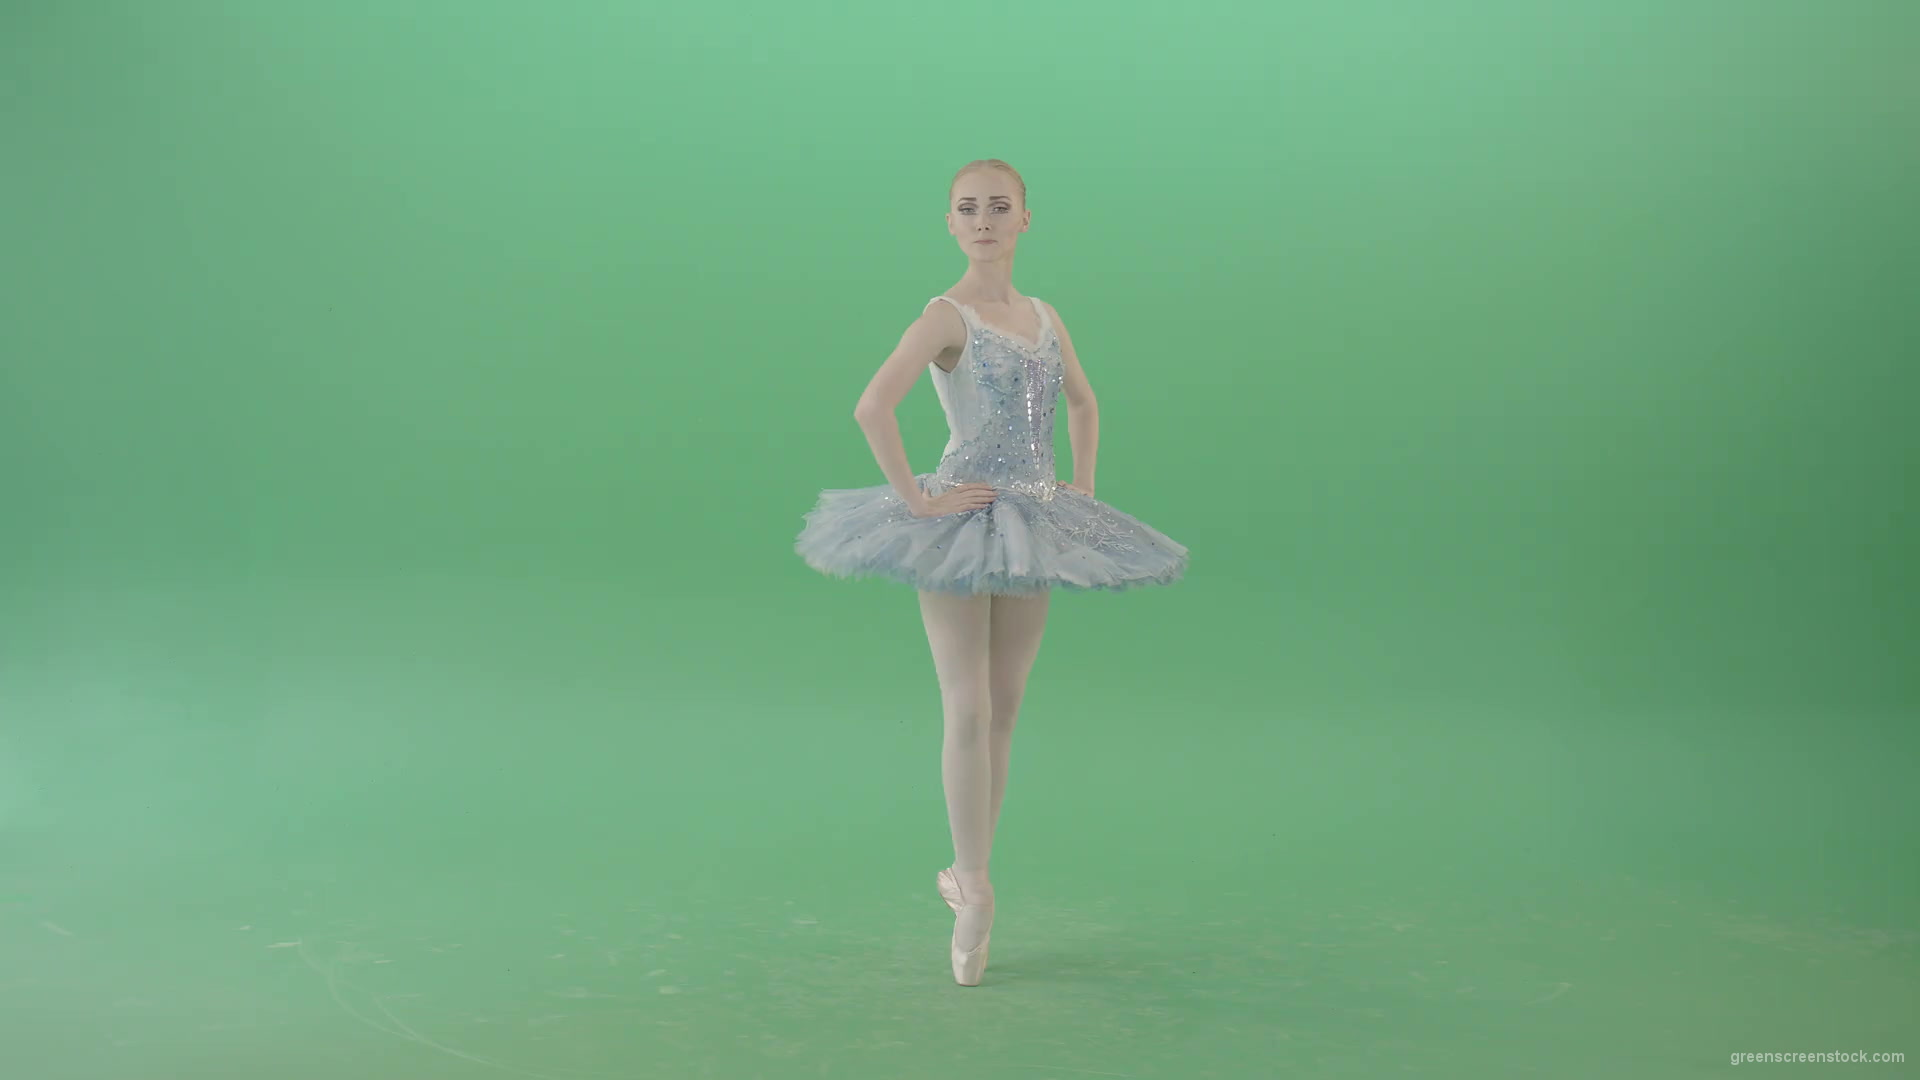 Beauty-blonde-girl-with-happy-smile-spinning-in-ballet-dress-over-green-screen-4K-Video-Footage-1920_001 Green Screen Stock